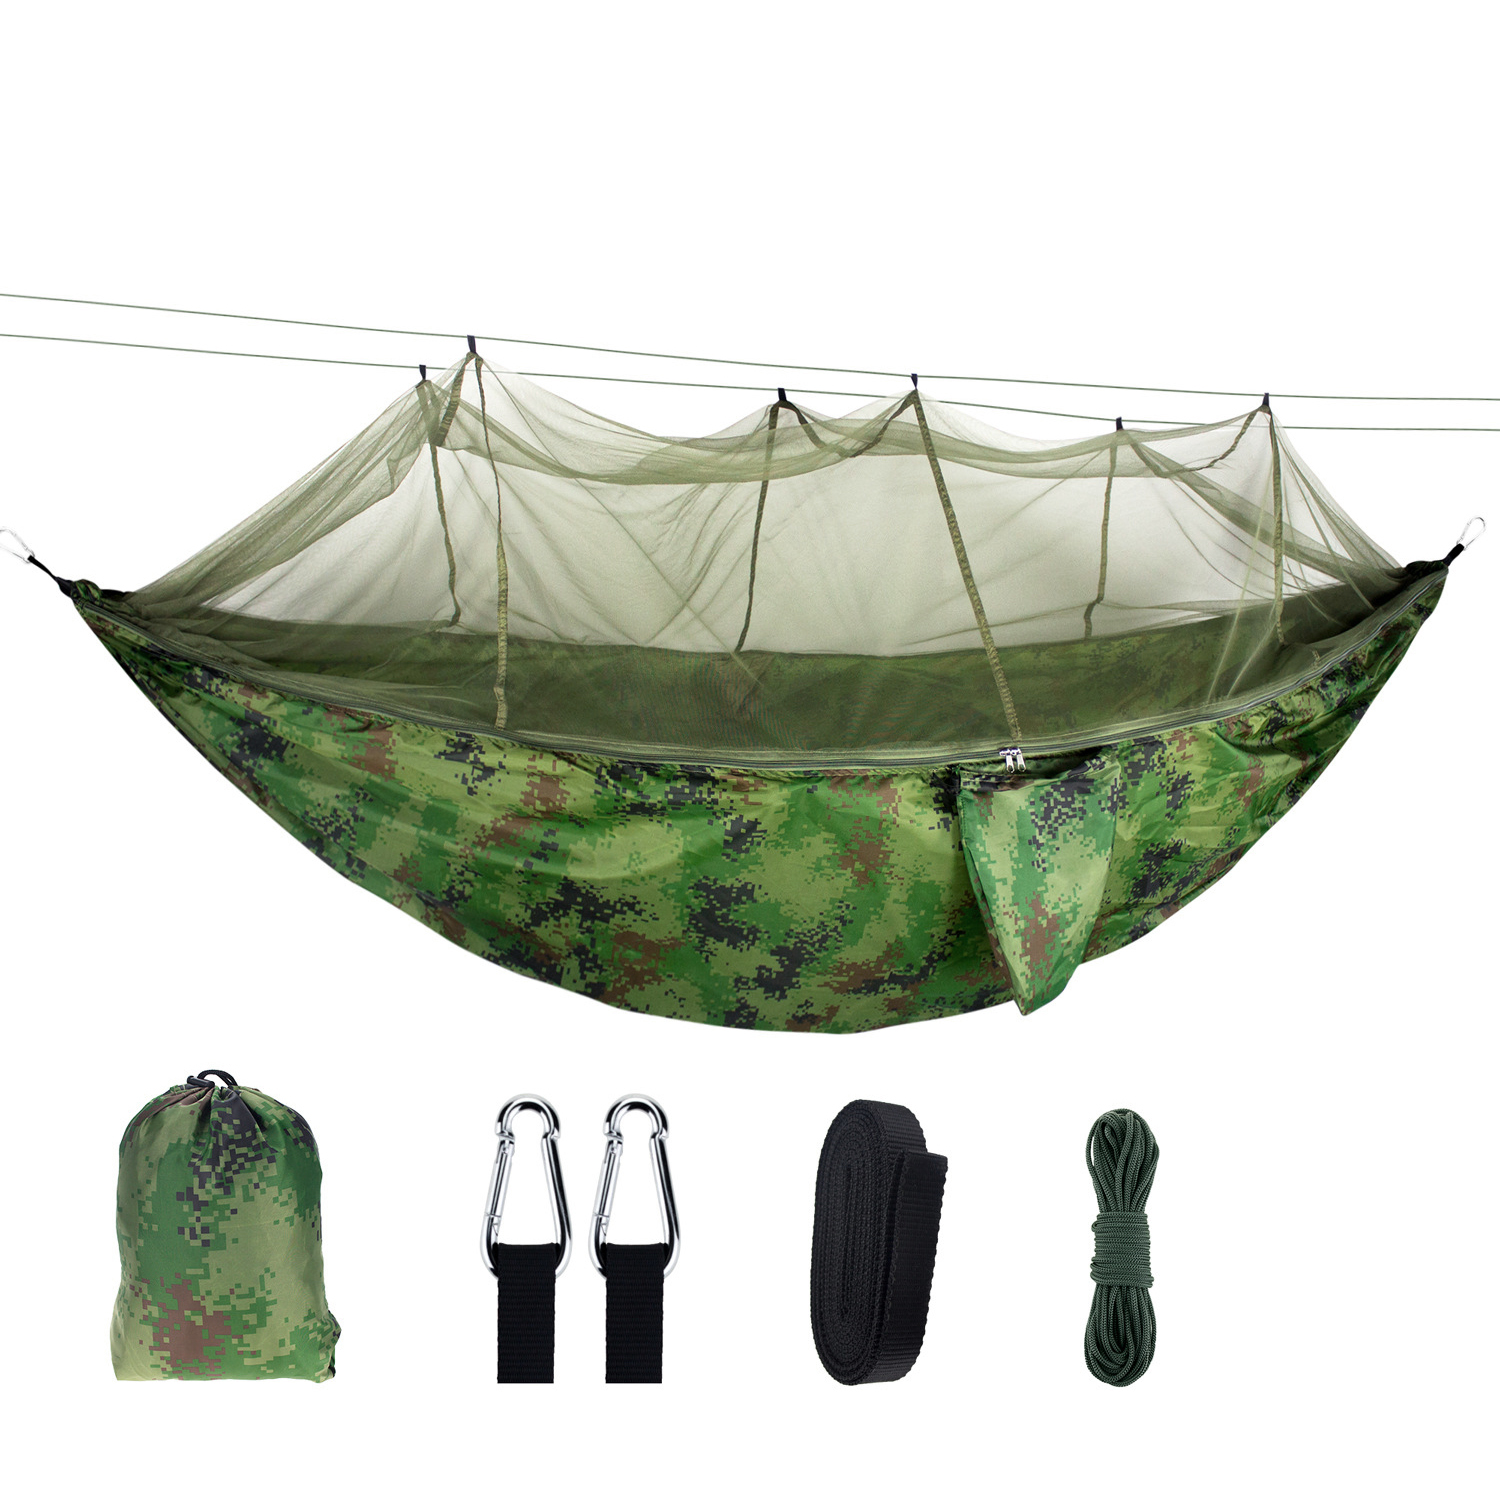 Cheap Goat Tents Outdoor Camping Hammock Portable Ultralight Tent 1 2 Person Hanging Bed with Mosquito Net Ultralight Tourist Sleeping Hammock